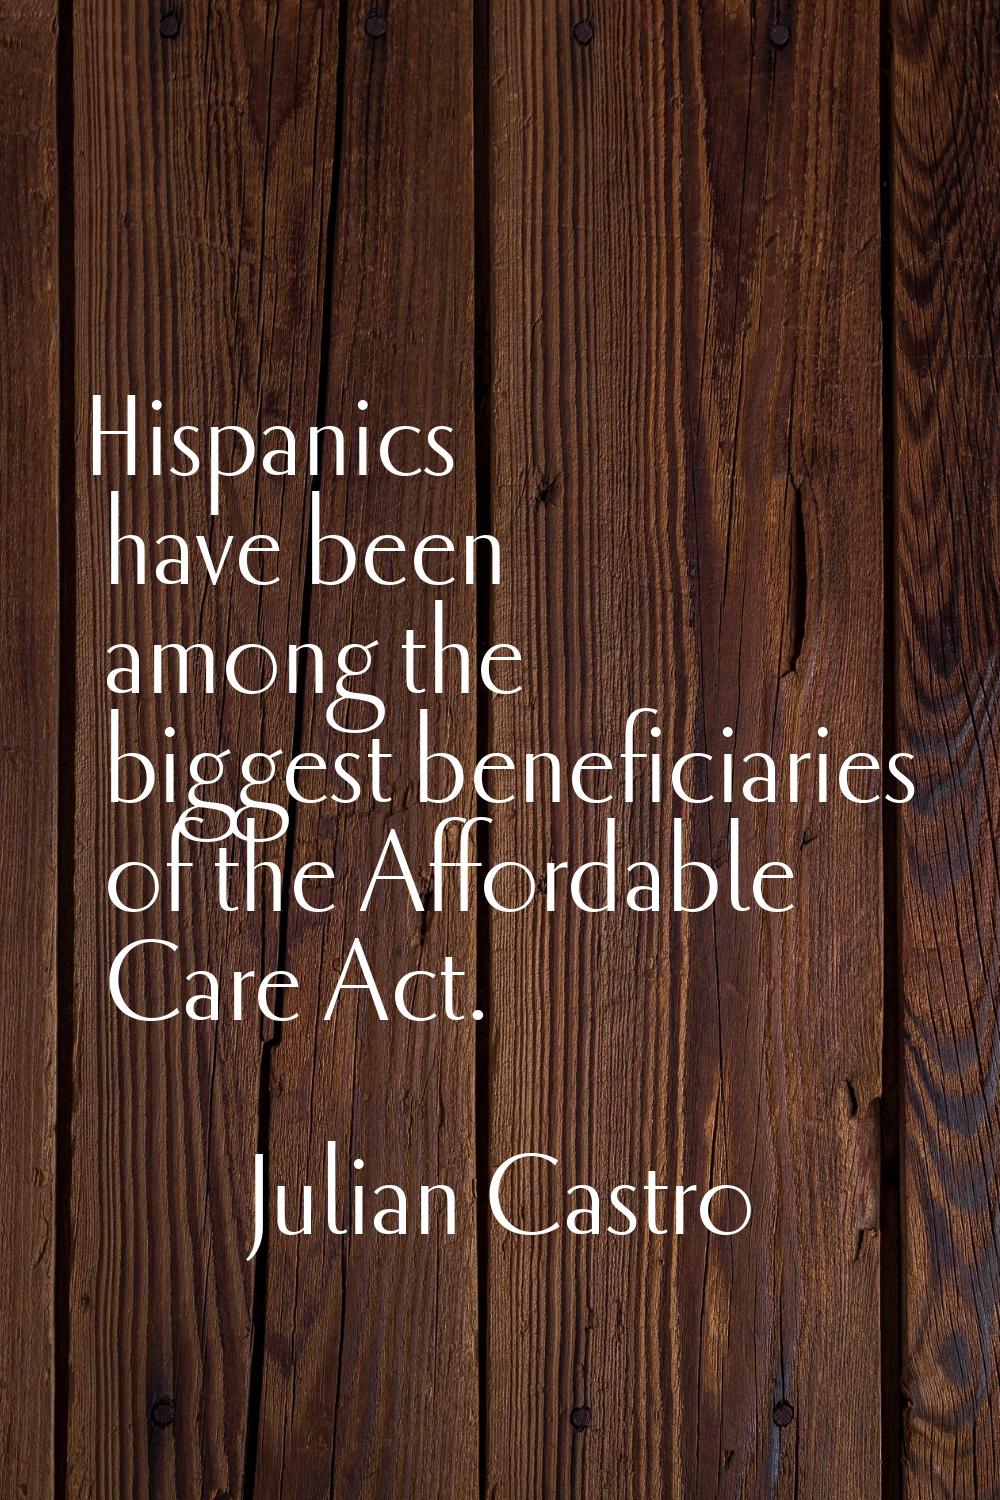 Hispanics have been among the biggest beneficiaries of the Affordable Care Act.